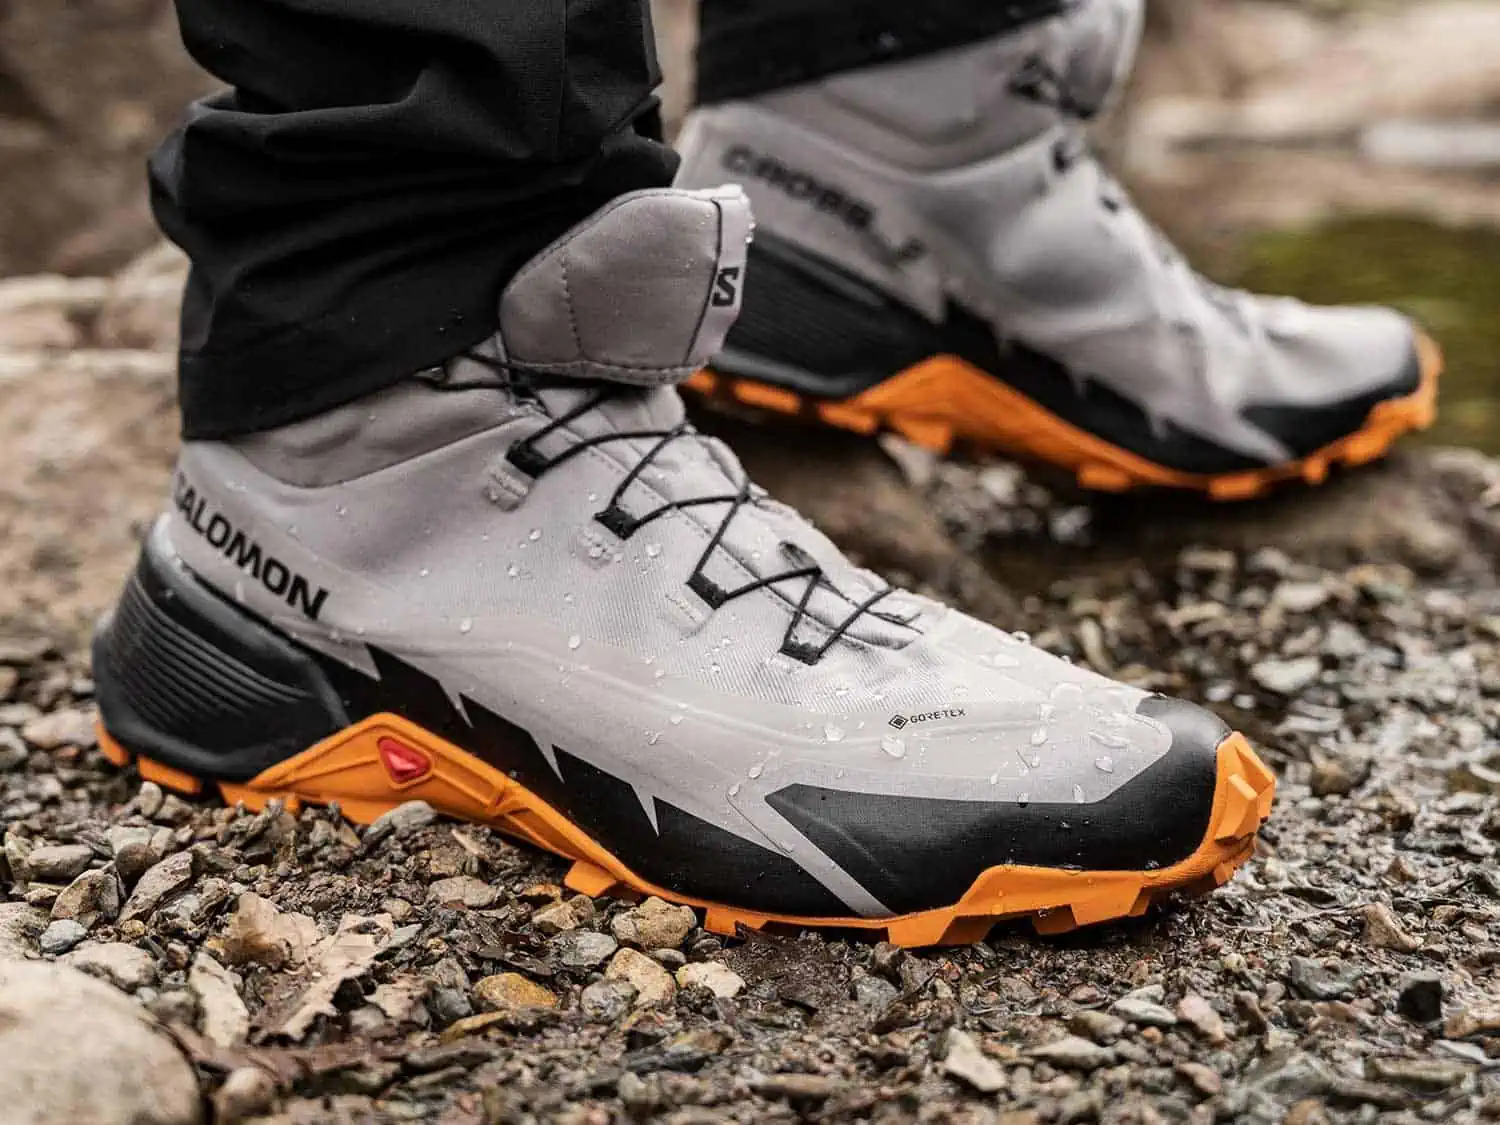 salomon cross hike mid 2 gore tex shown with water droplets